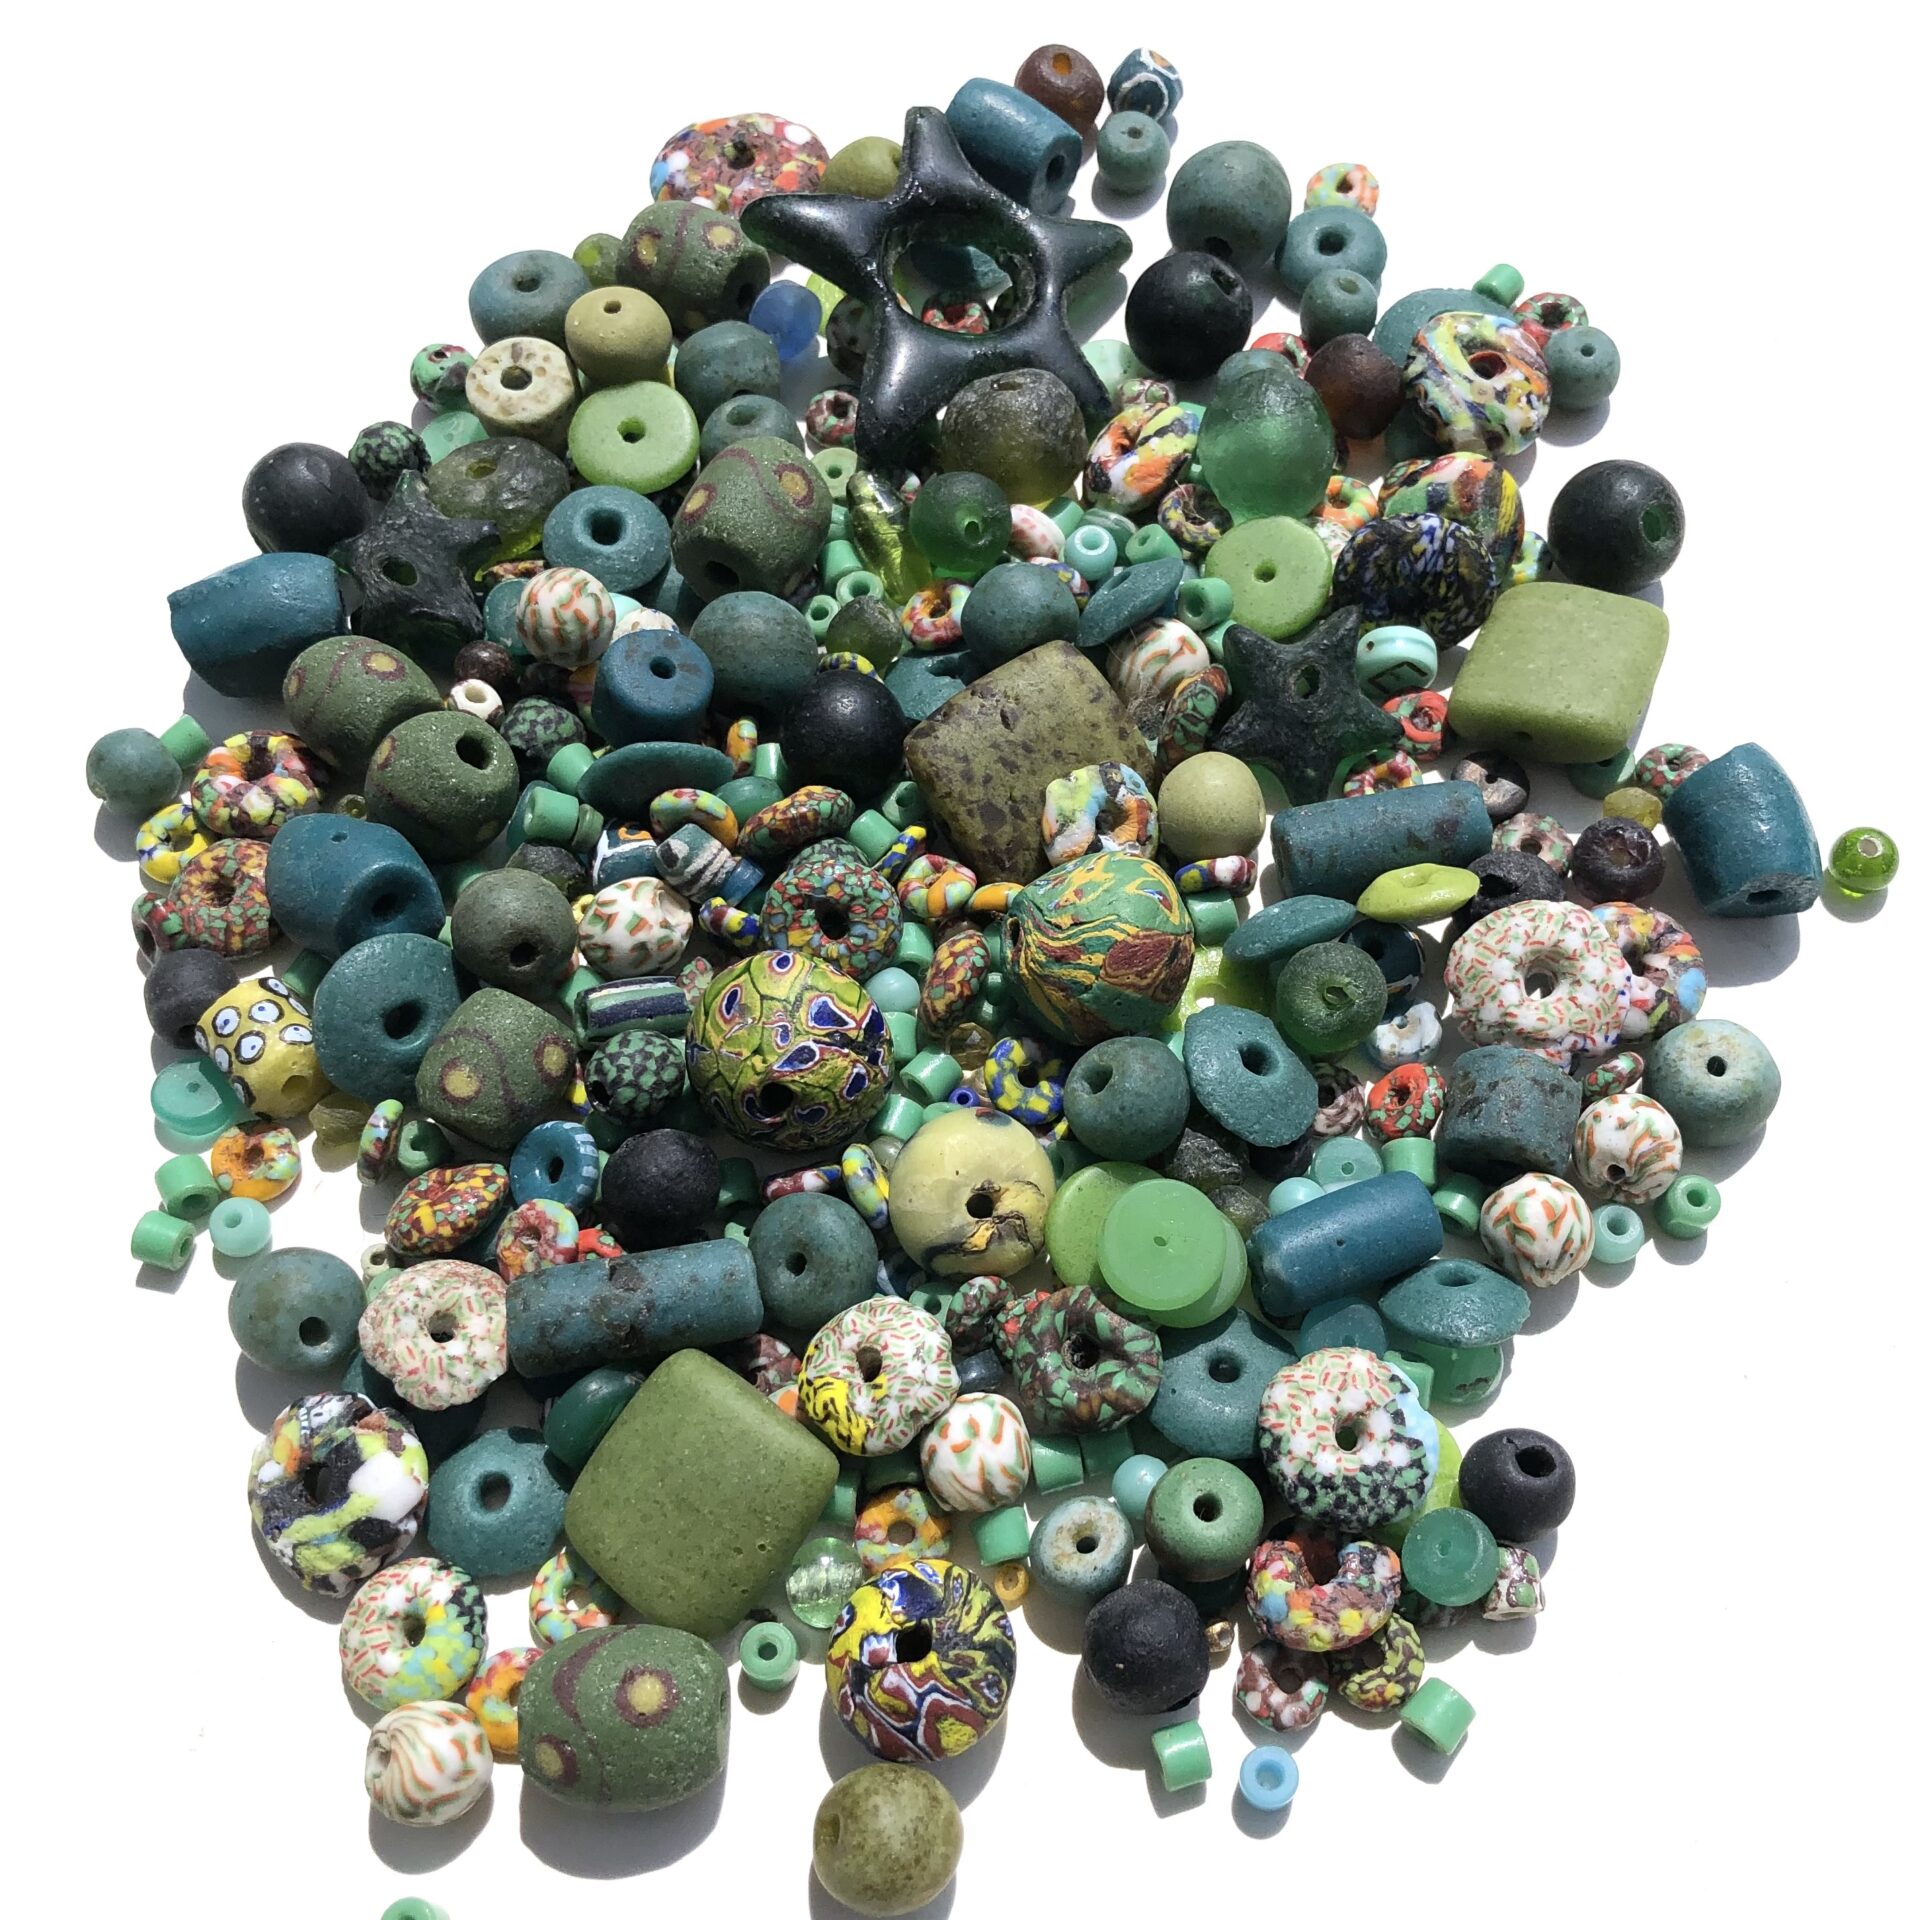 Mixed Green Recycled Glass Beads